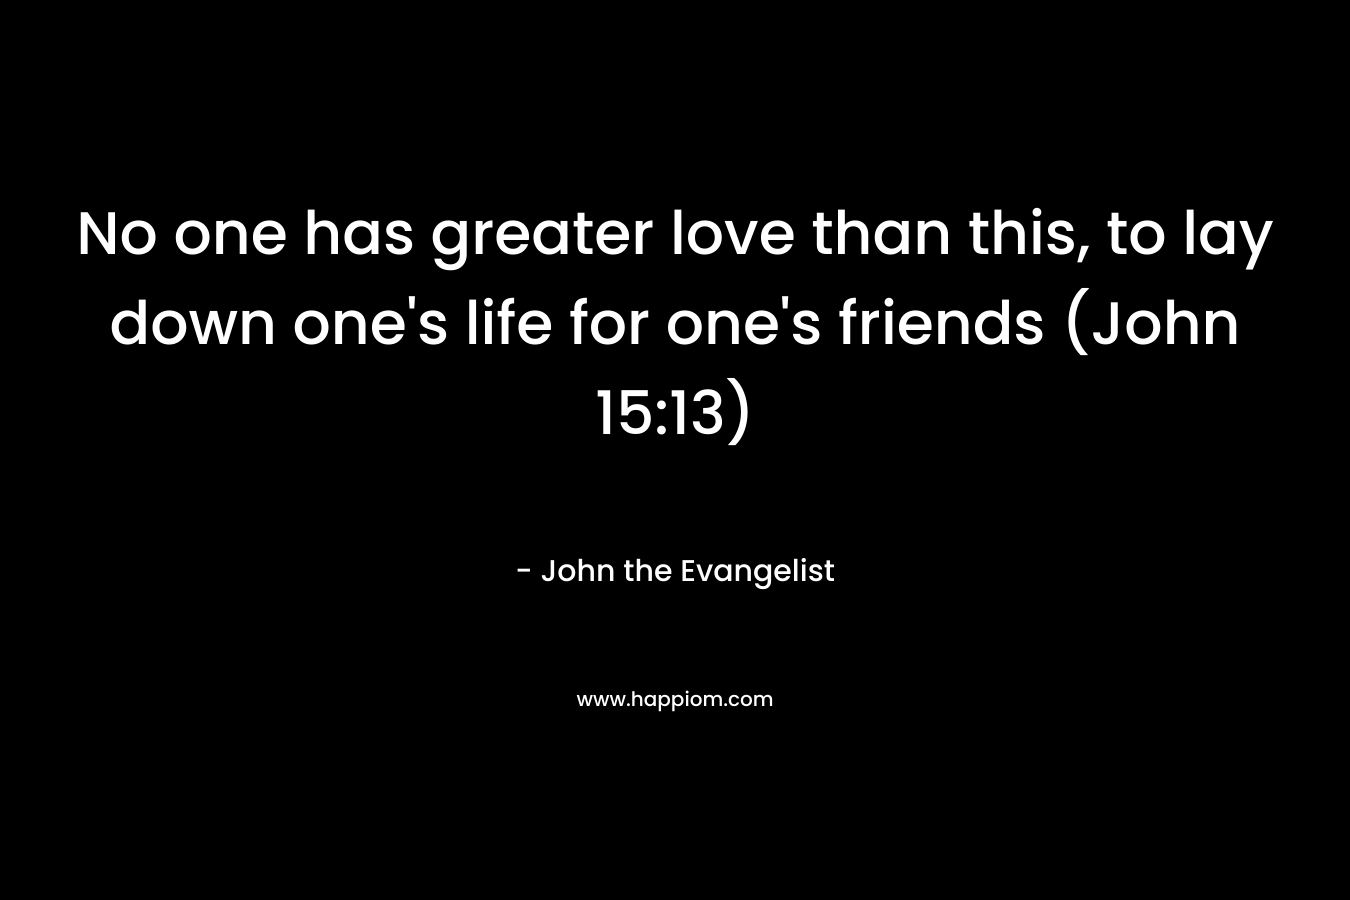 No one has greater love than this, to lay down one's life for one's friends (John 15:13)